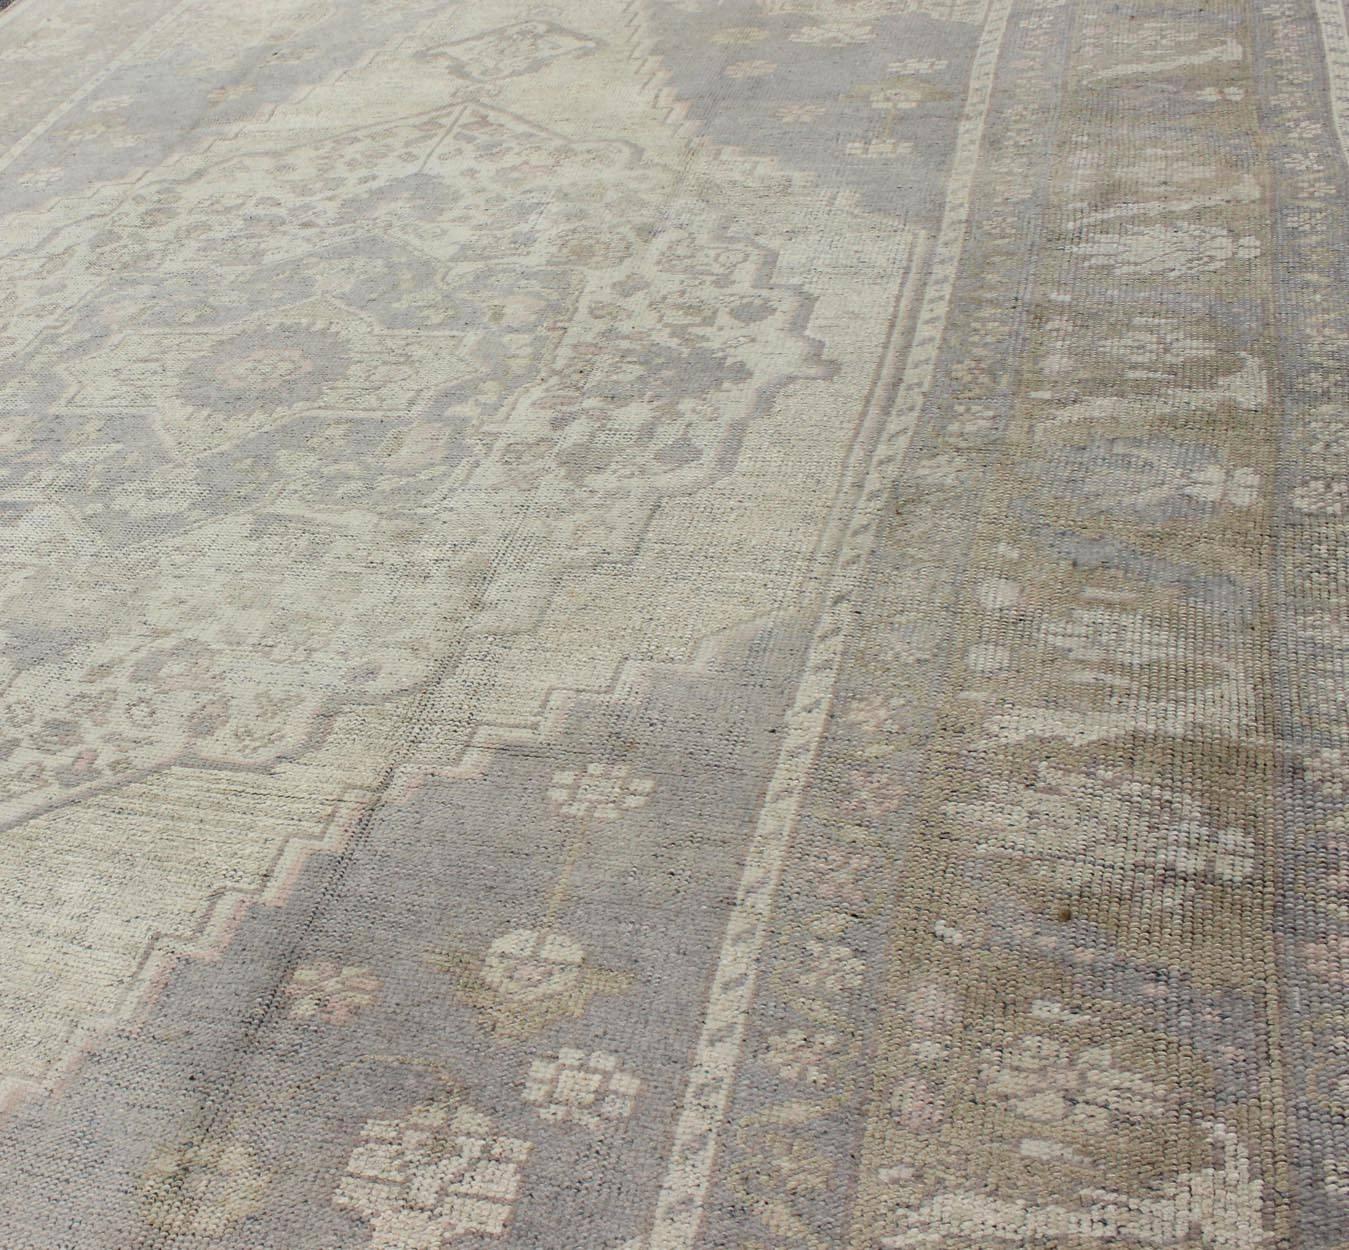 Mid-20th Century Vintage Oushak in Muted Colors of Gray, Taupe, Cream and Light Brown